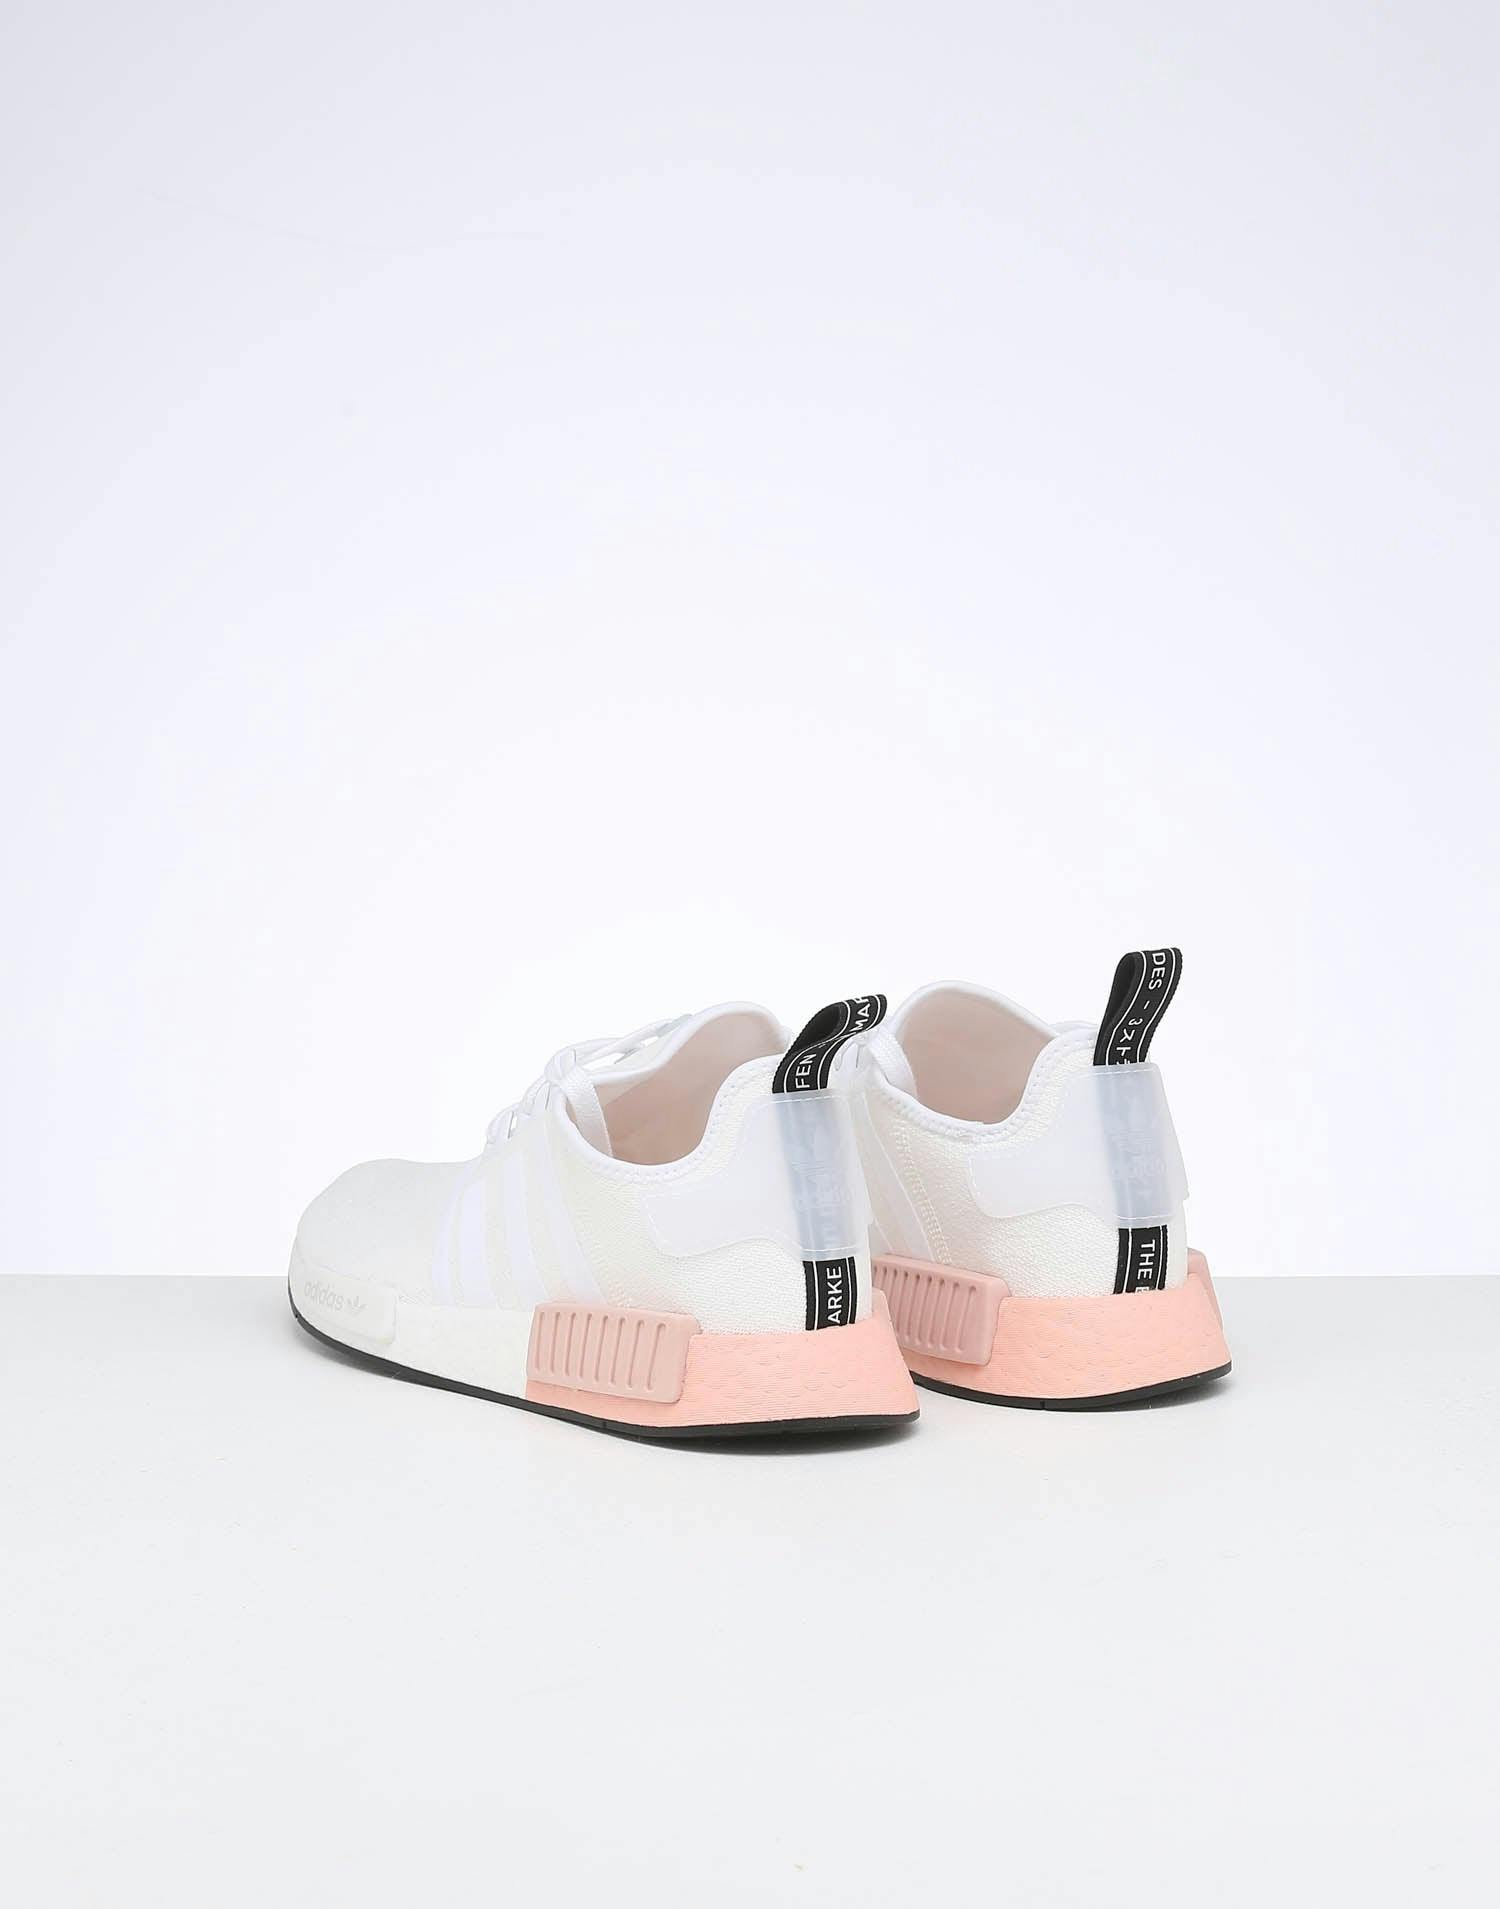 Adidas NMD_R1 White/Pink | Culture Kings NZ